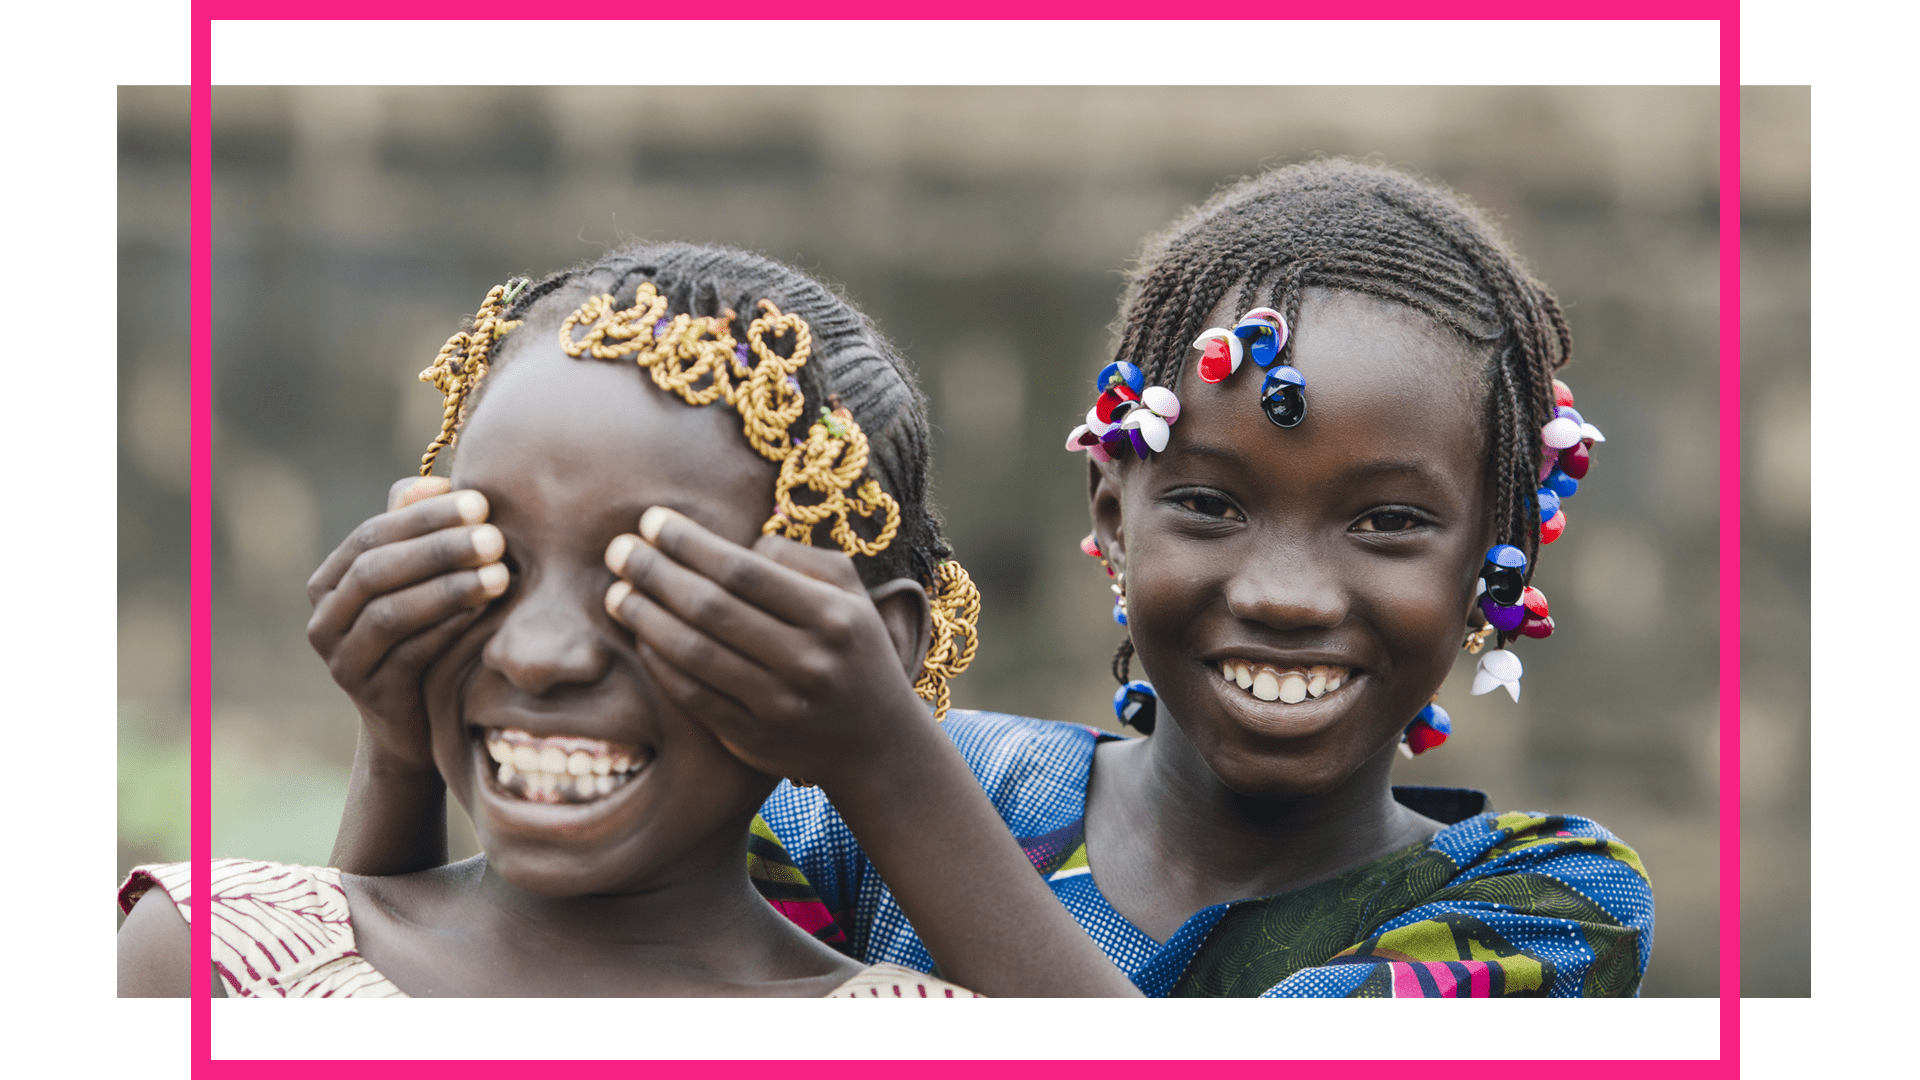 Two African girls smiling, one covering the other's eyes